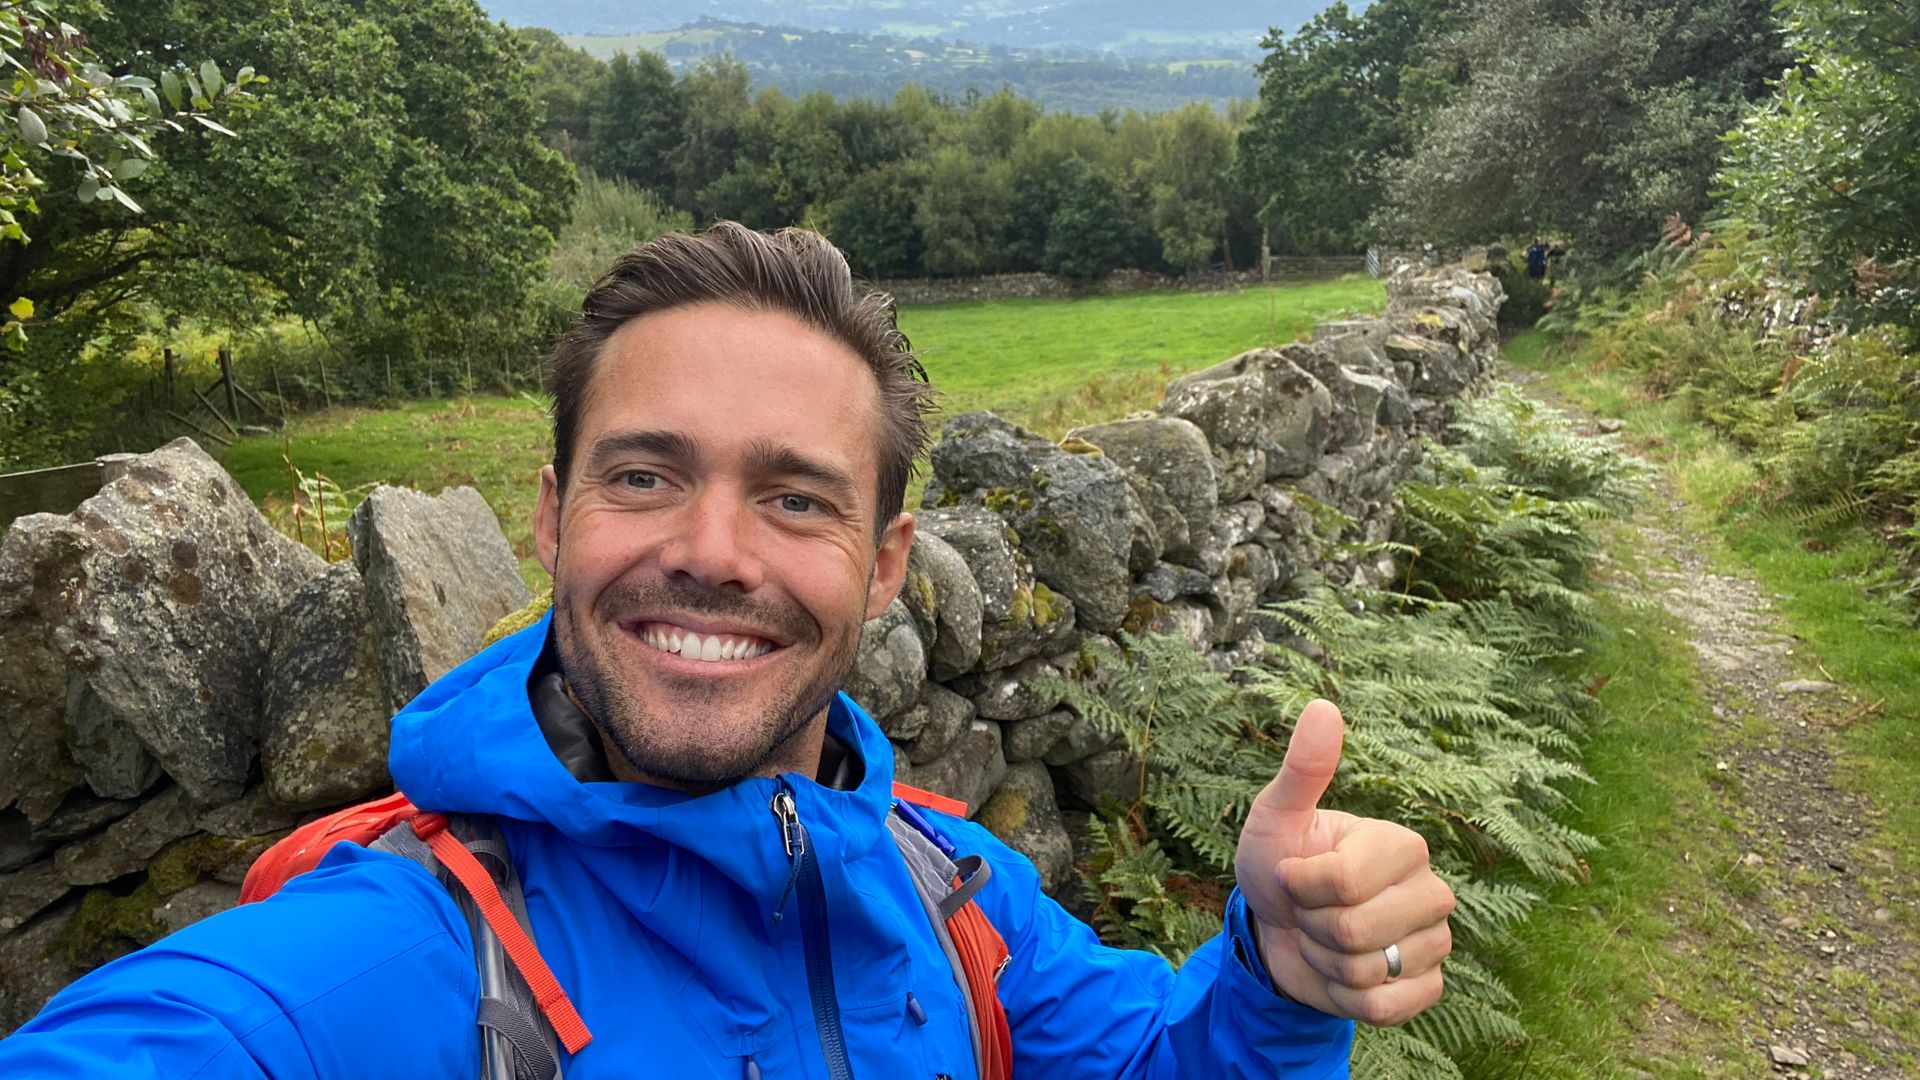 Spencer Matthews is set to appear in the new BBC show